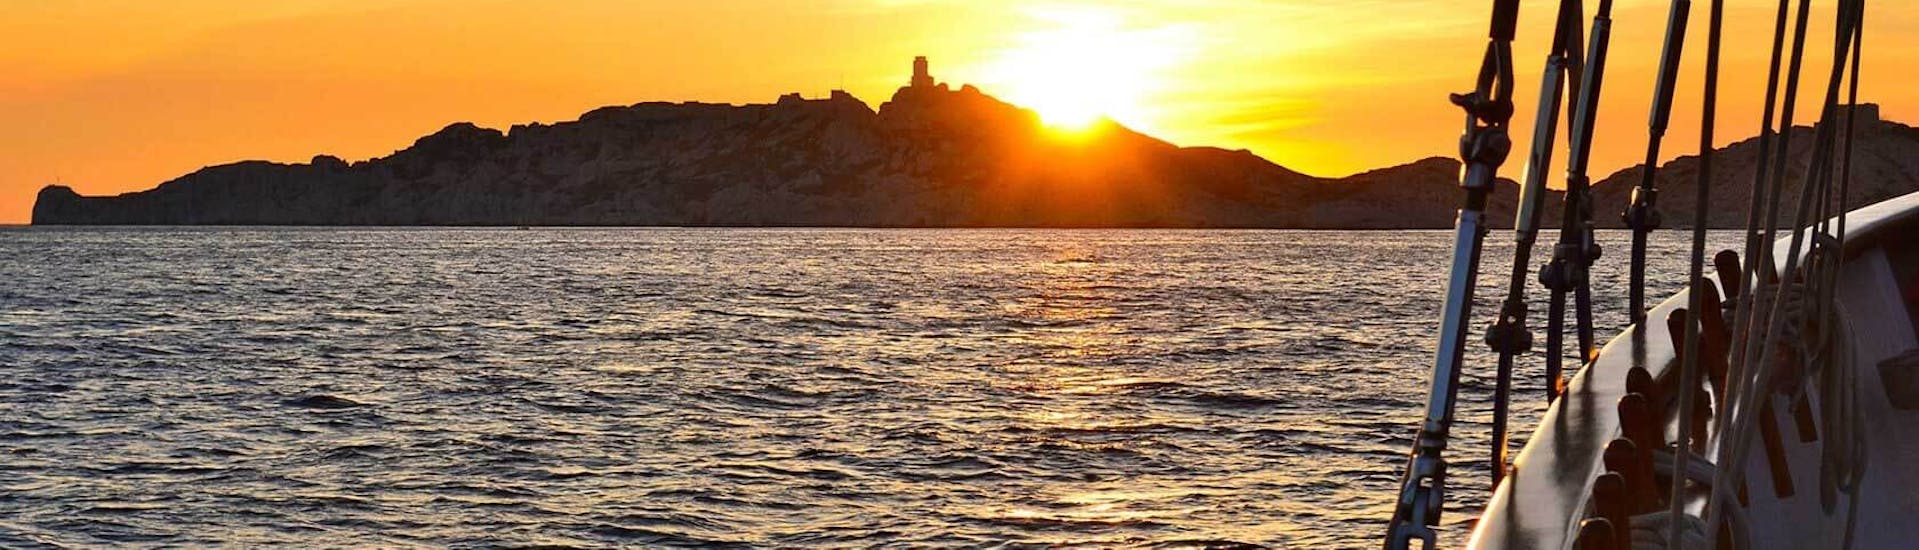 View of the Frioul Islands during the Sunset Sailing Trip with Dinner with La Goélette Alliance Marseille.